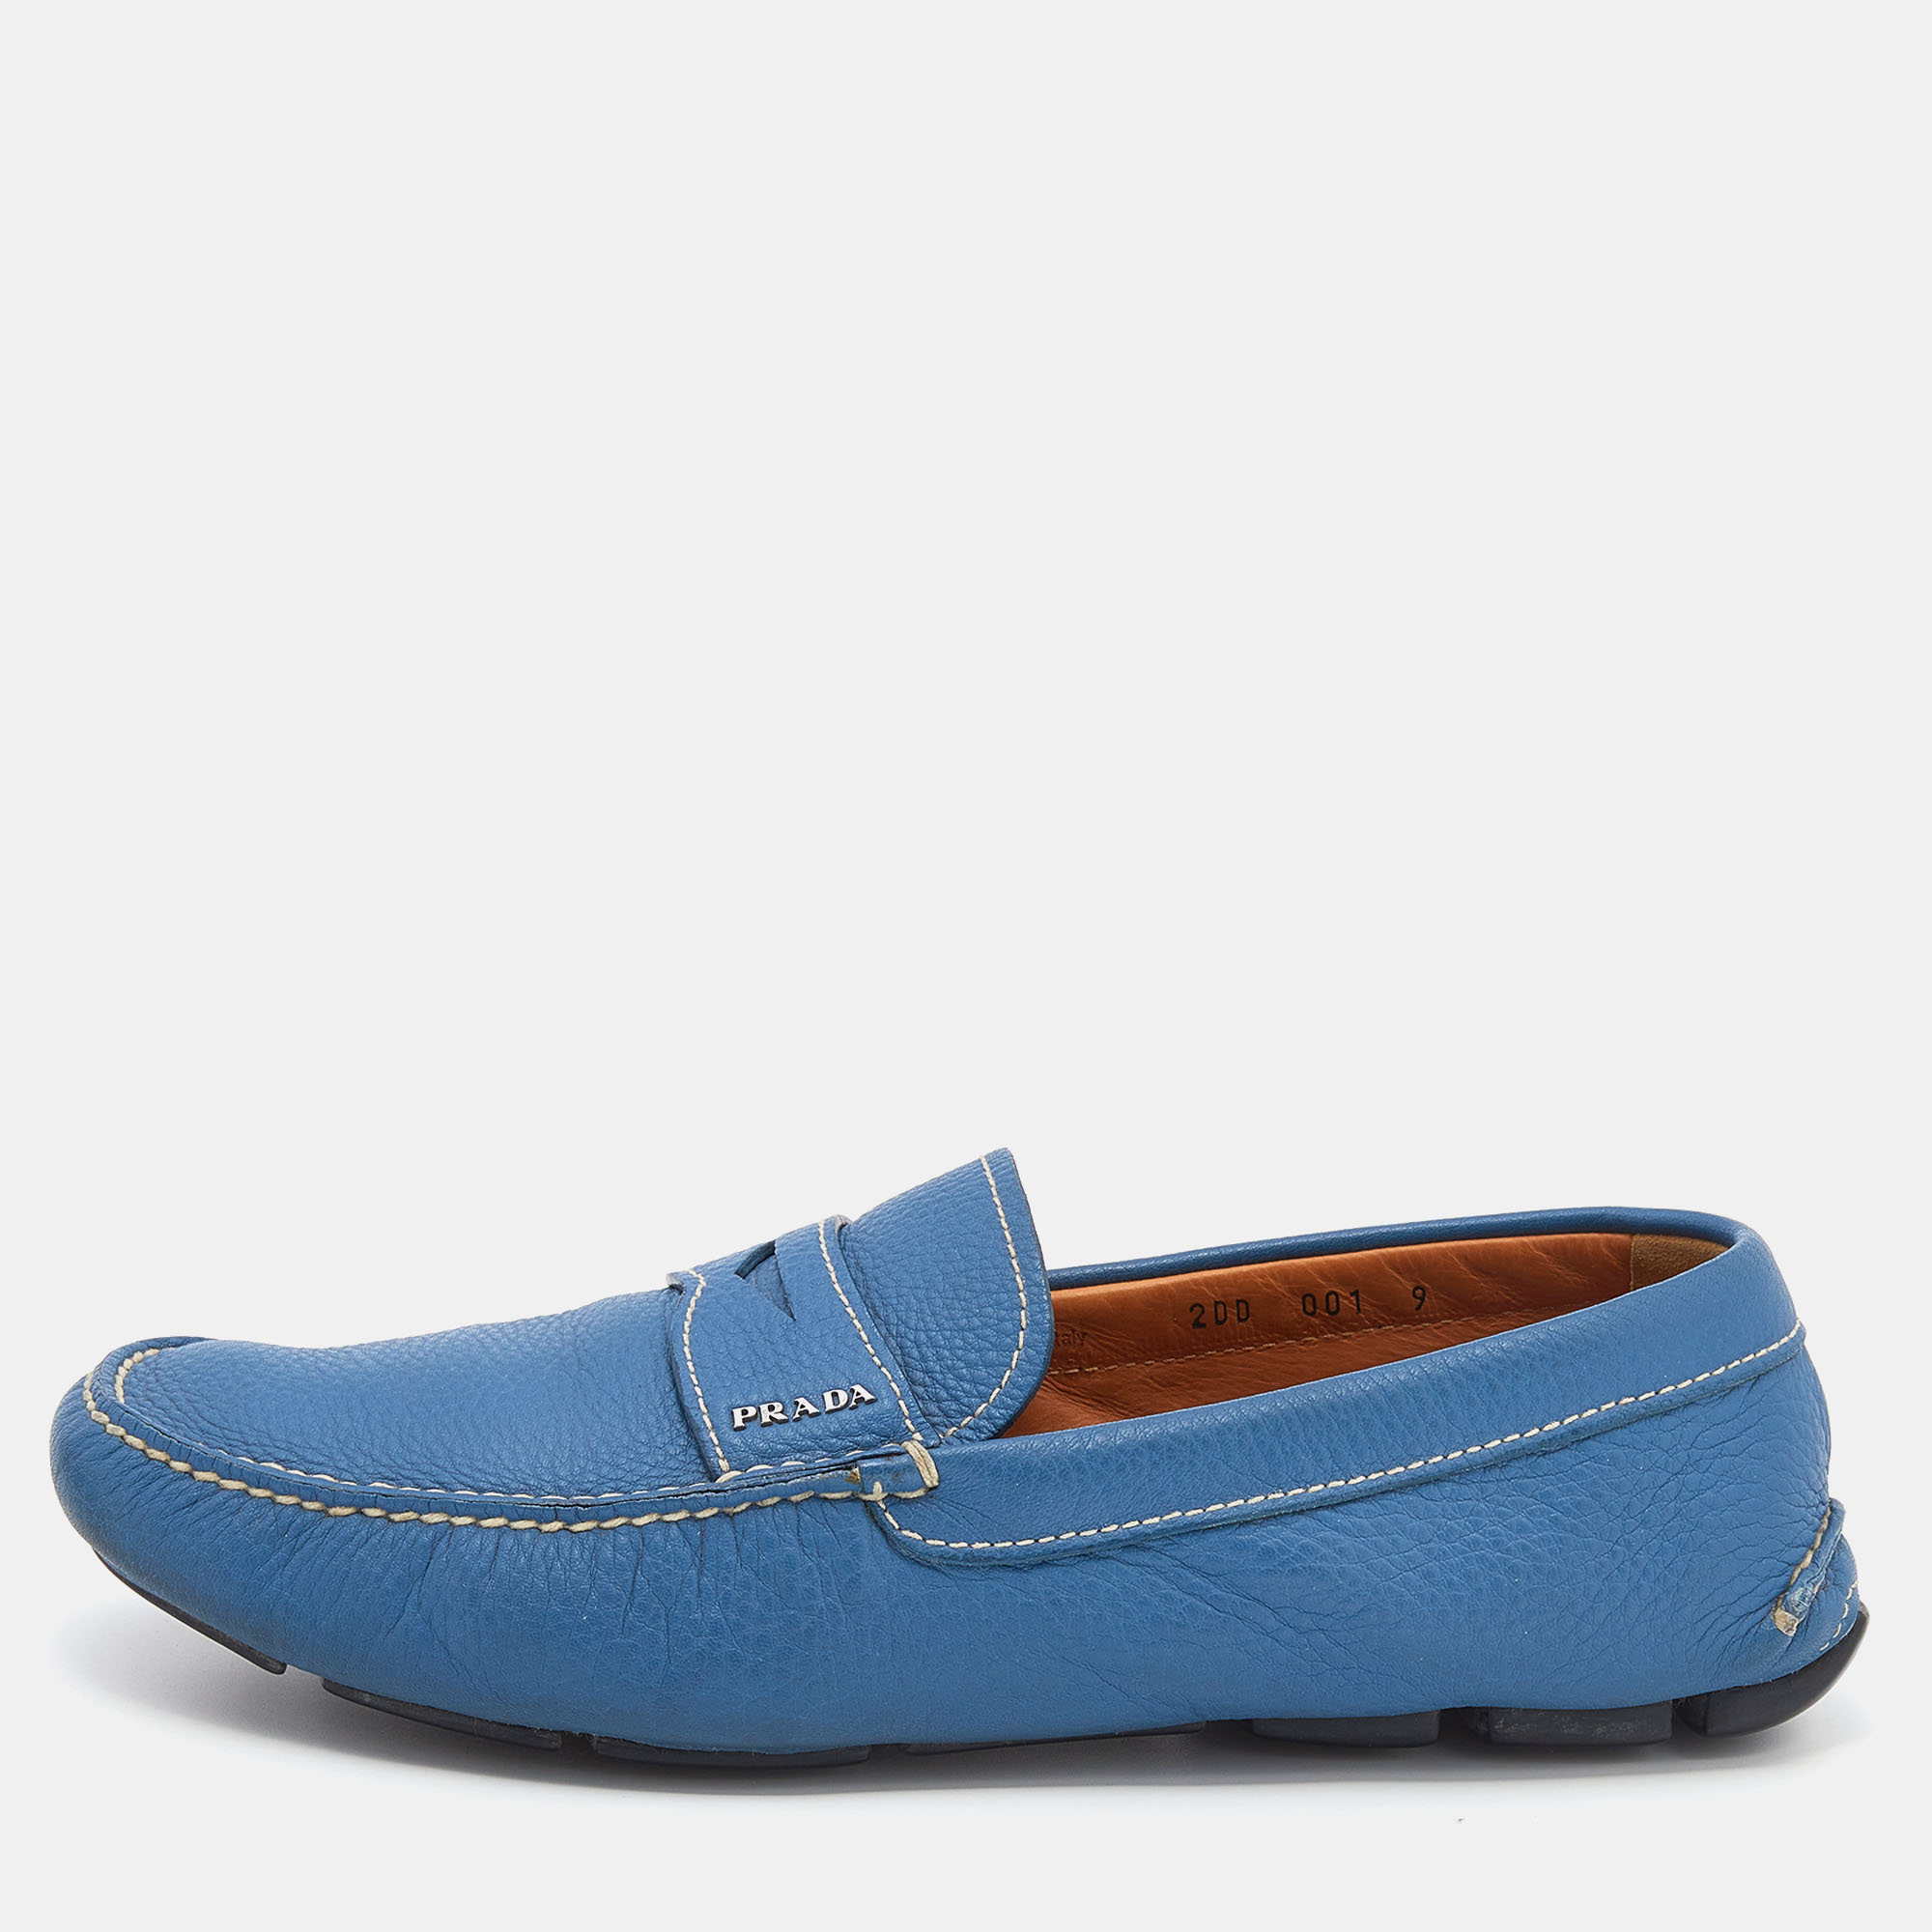 Prada Blue Leather Slip On Driving Loafers Size 43